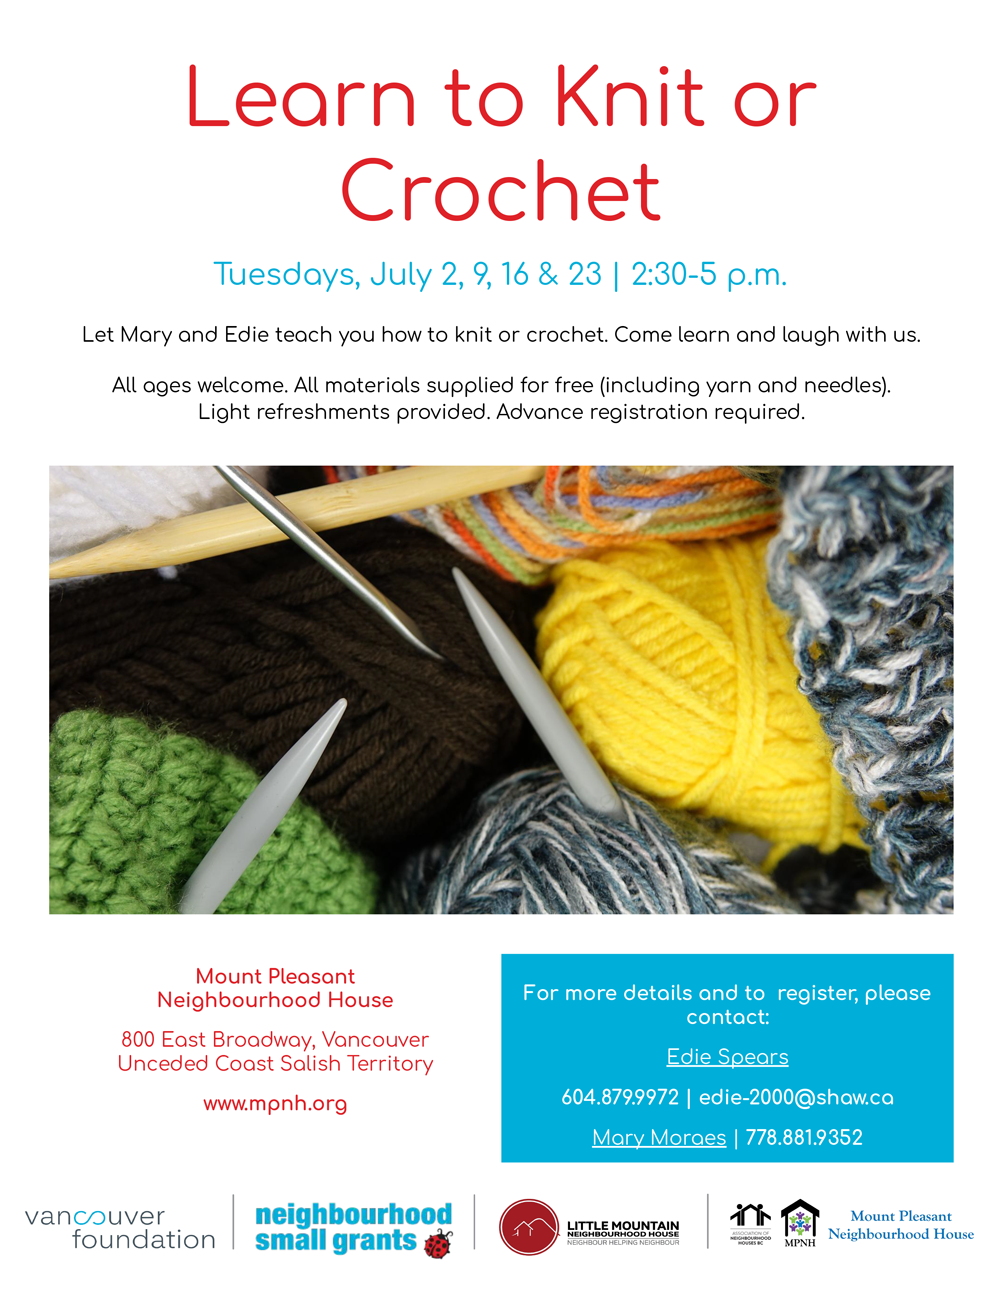 An image of the poster with project details, featuring colourful balls of yarn and knitting and crochet needles.